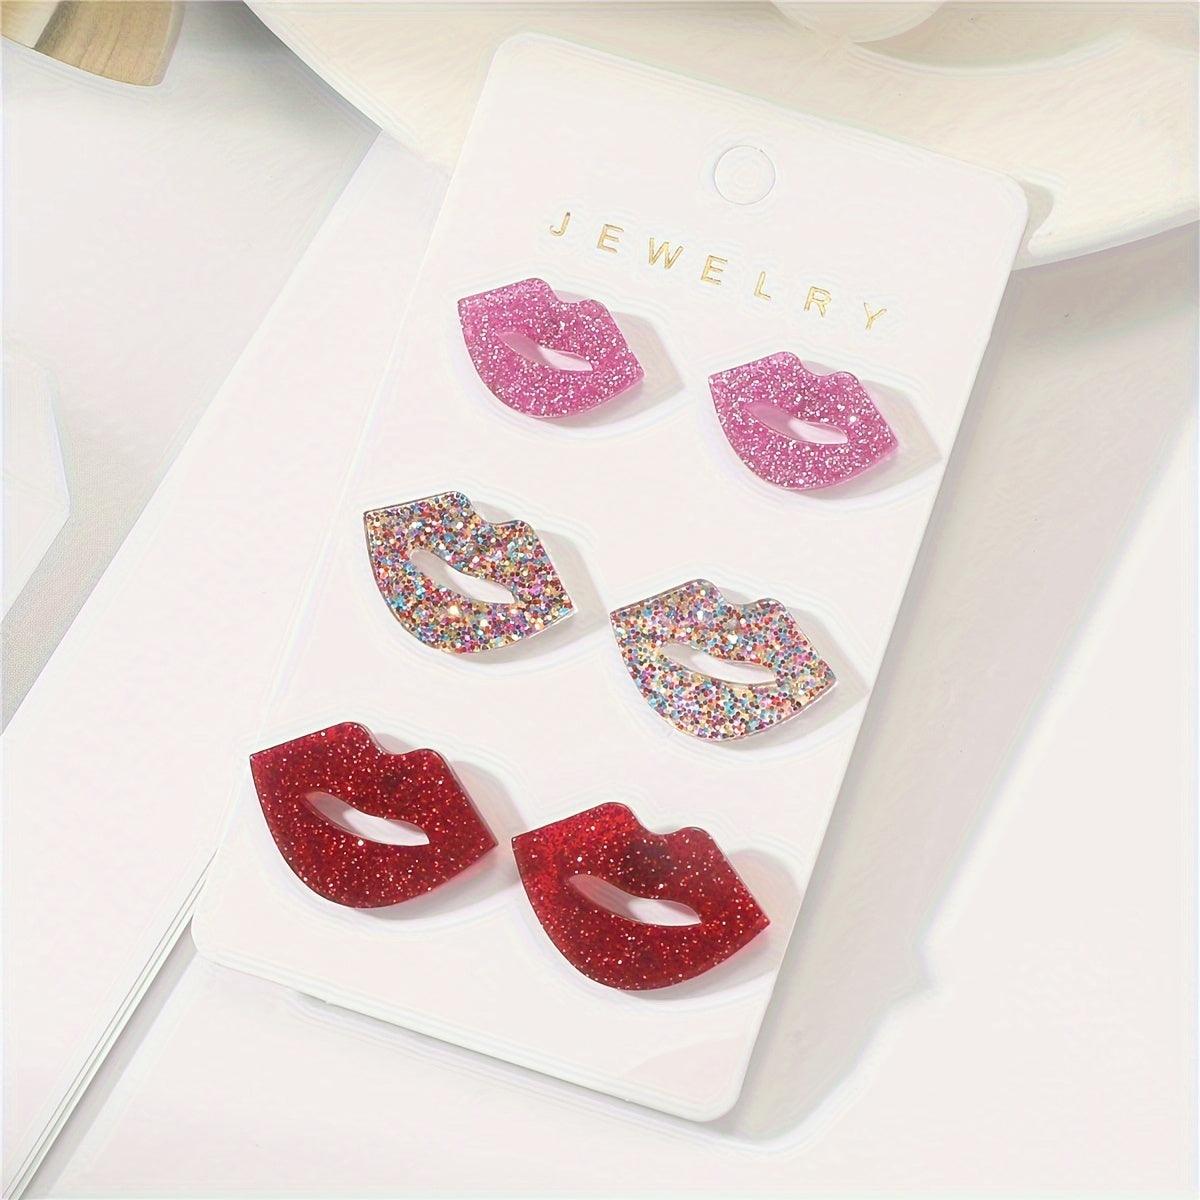 Glamorous 3-Pair Glitter Lip Earrings Set in Red, Silver, and Pink